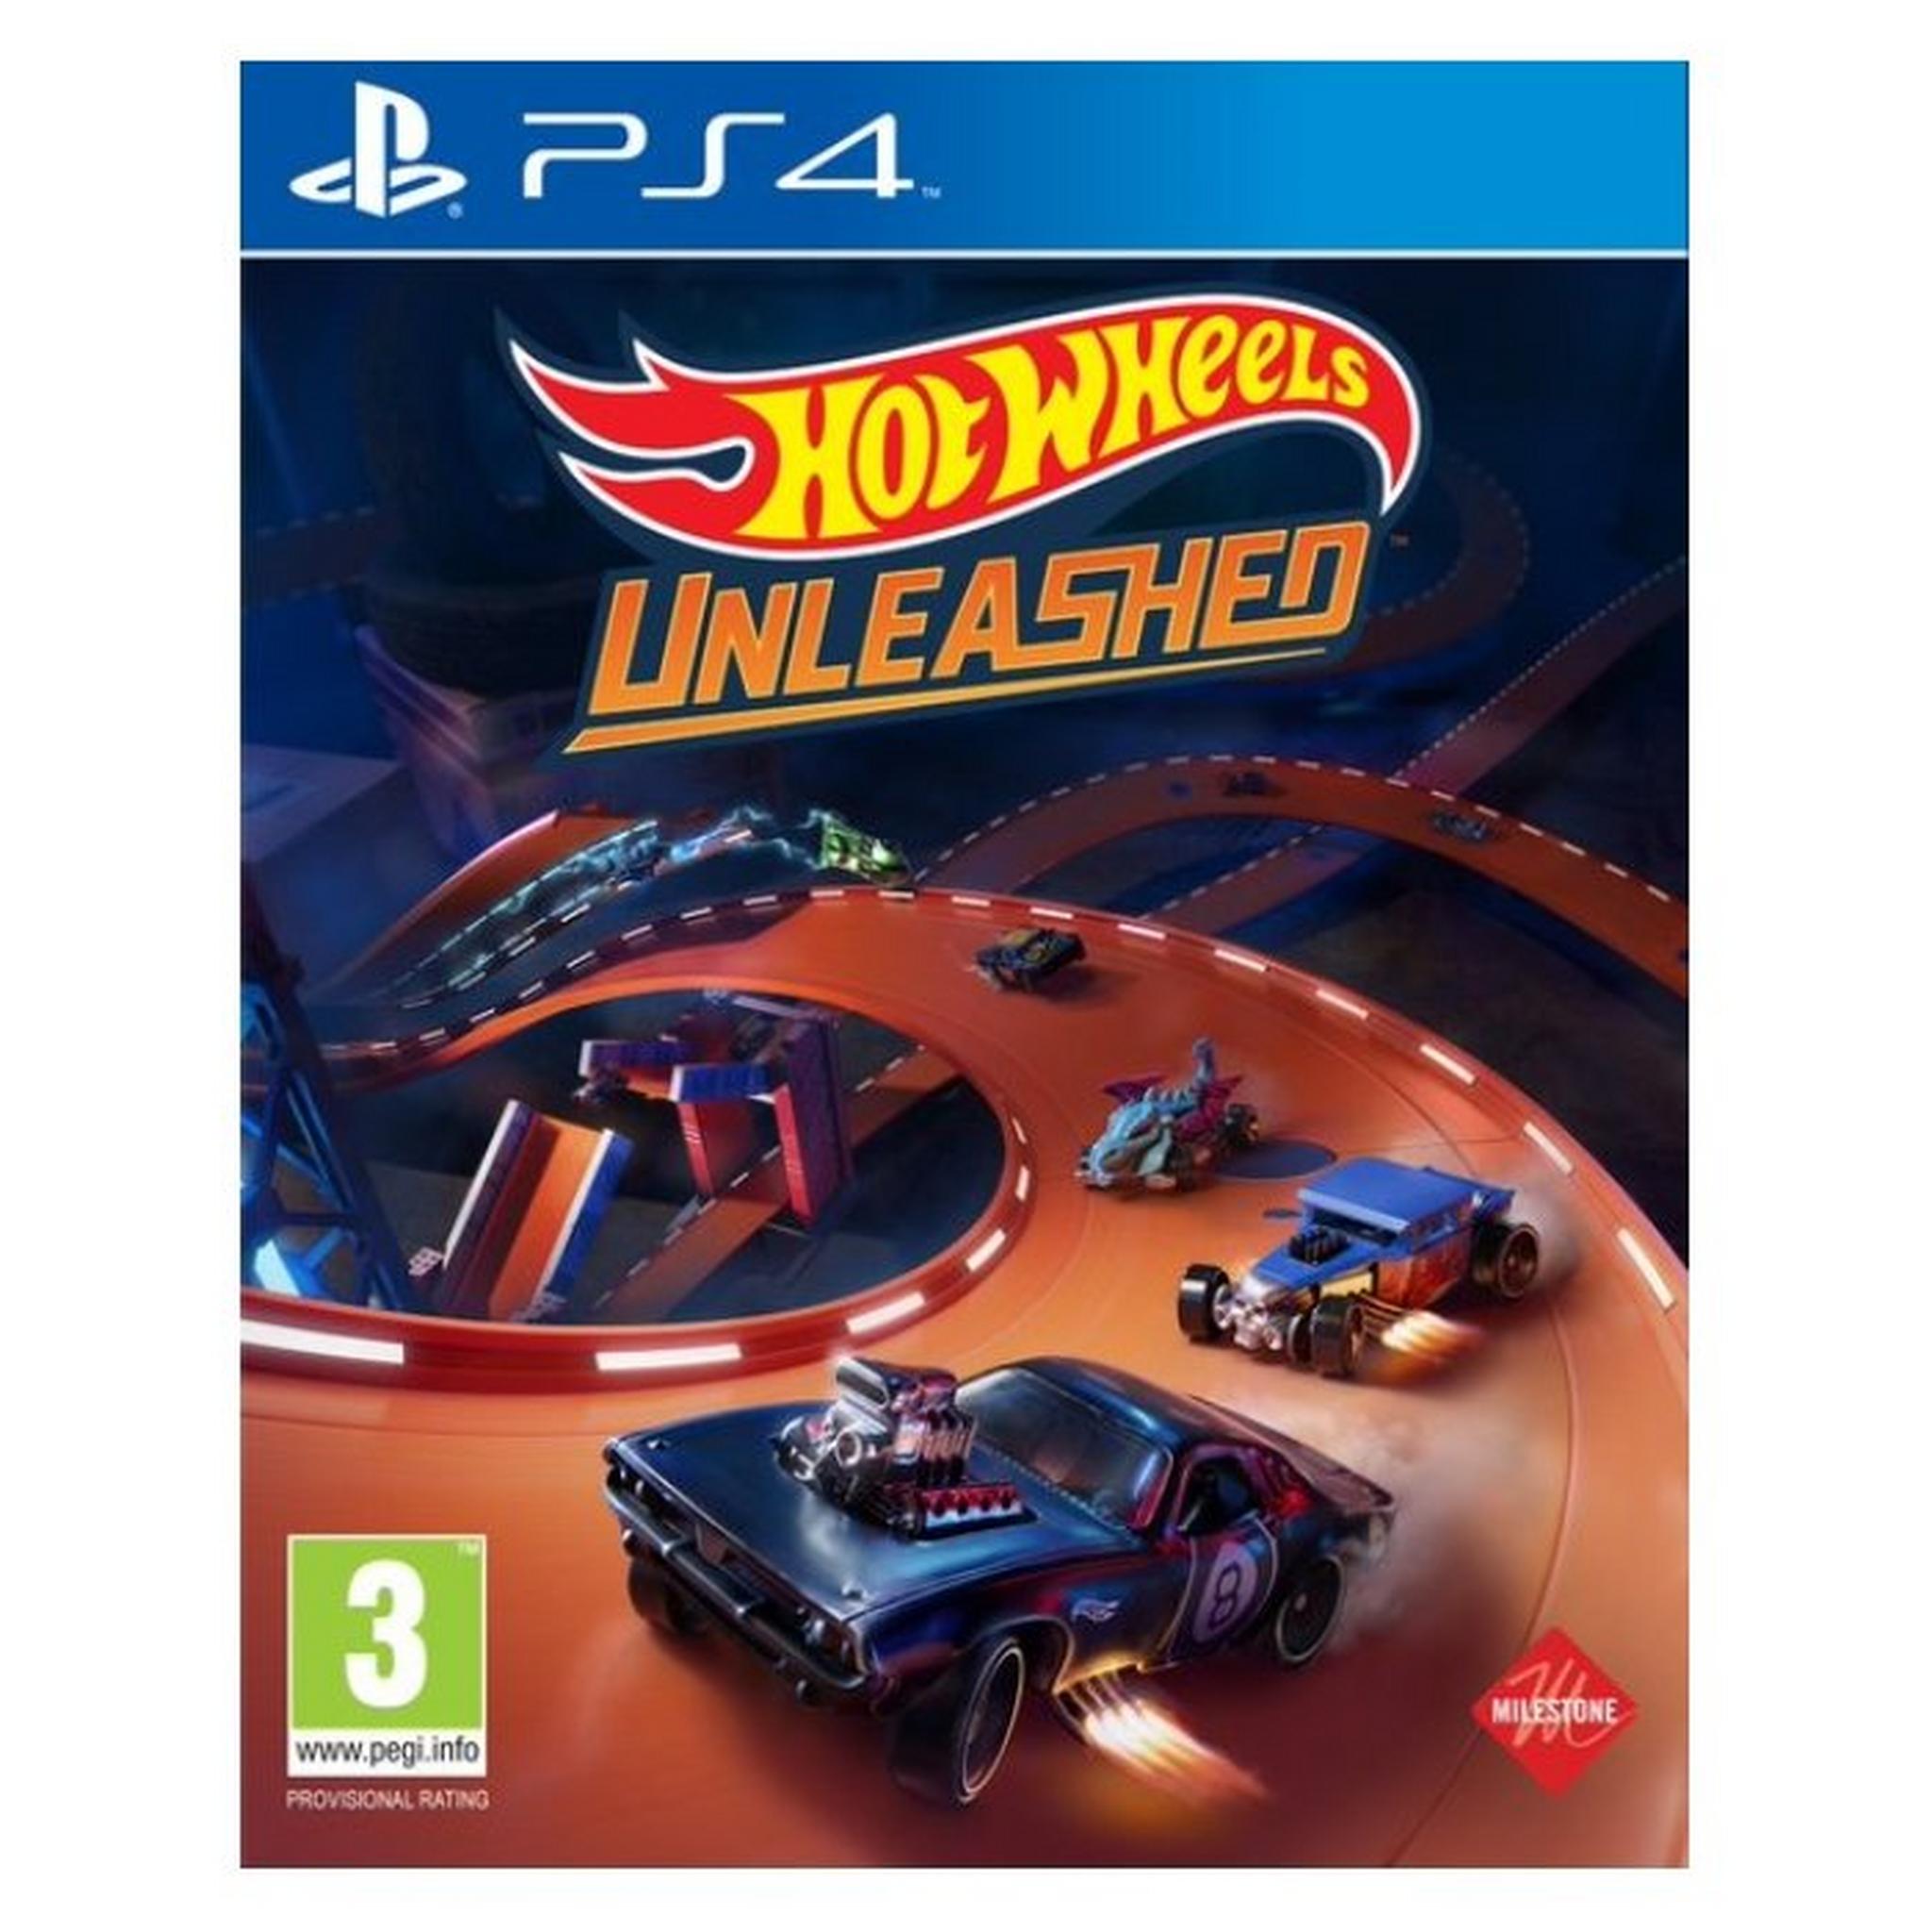 Hot Wheels Unleashed - PS4 Game